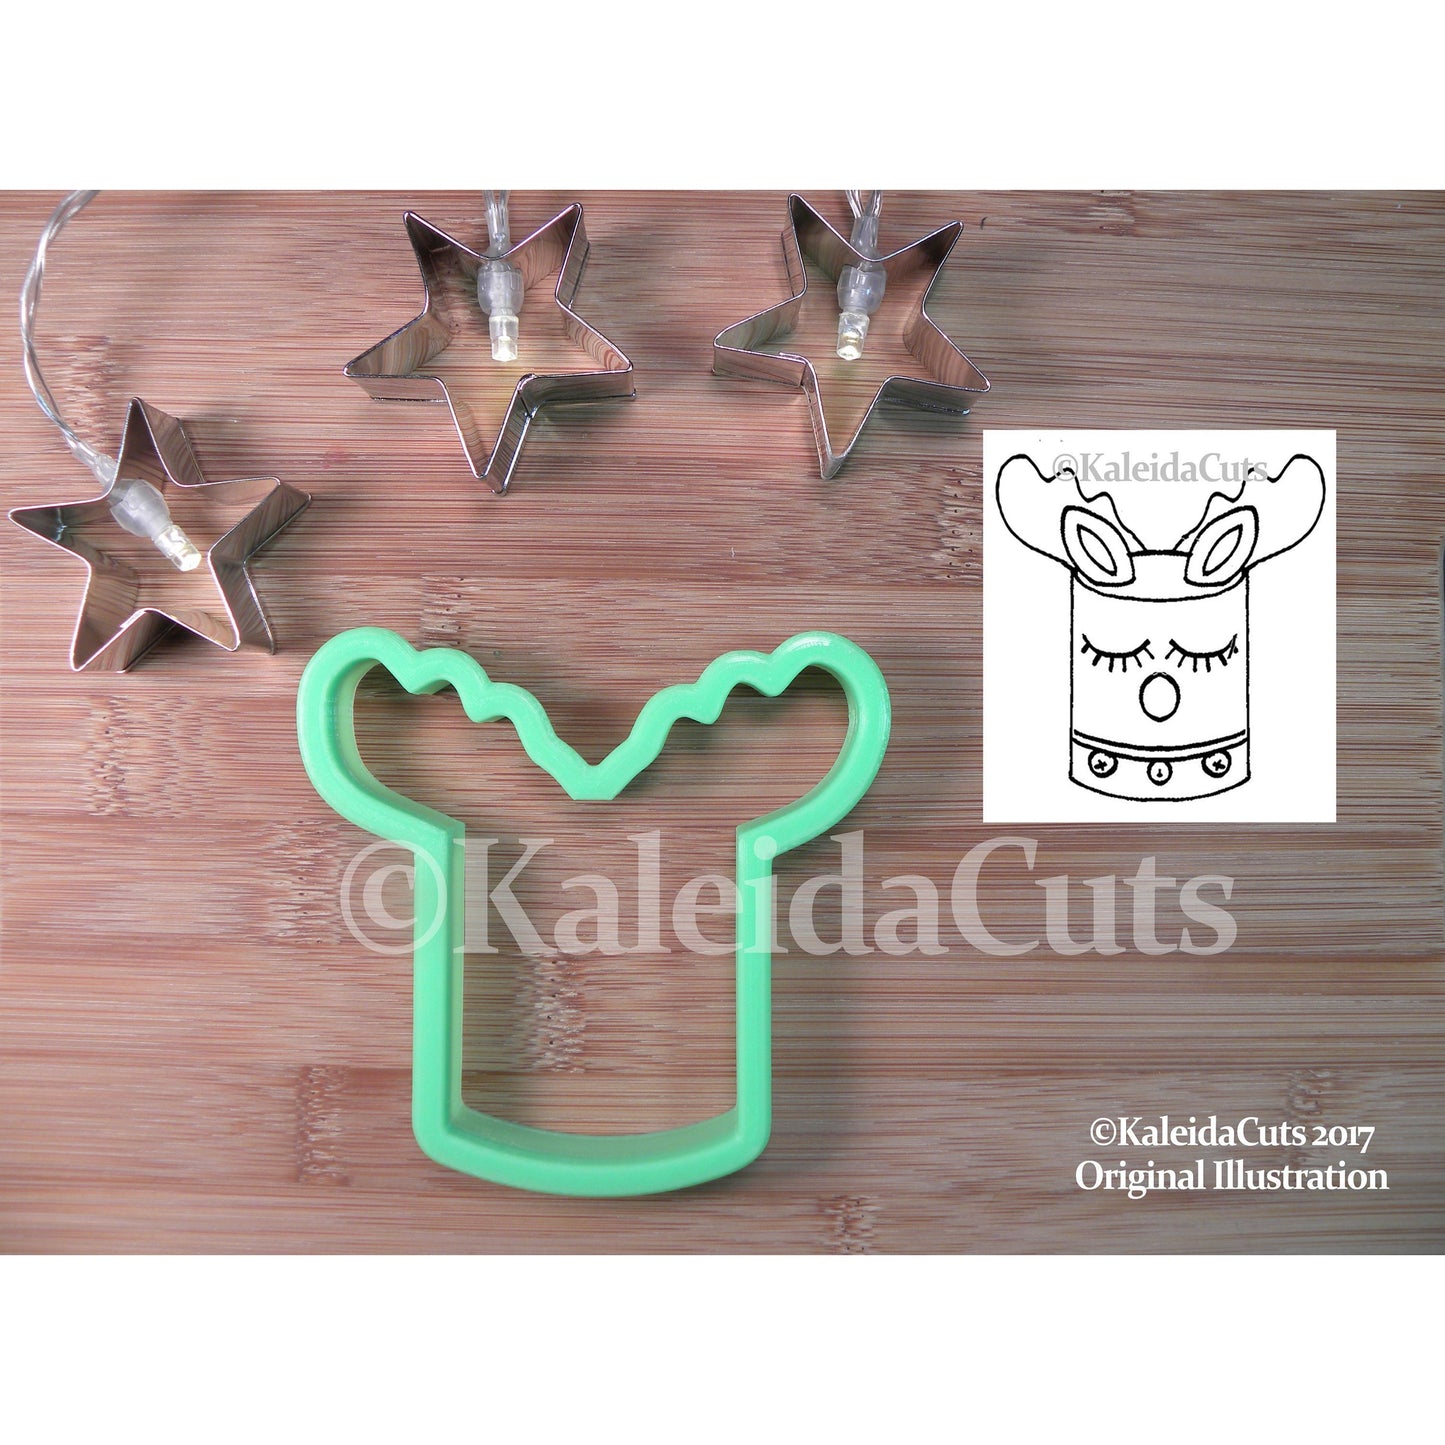 Reindeer Cake Cookie Cutter. Christmas Cookie Cutter. Winter Cookie Cutter. Animal Cookies. Birthday Cookie Cutters. Baking Gifts.